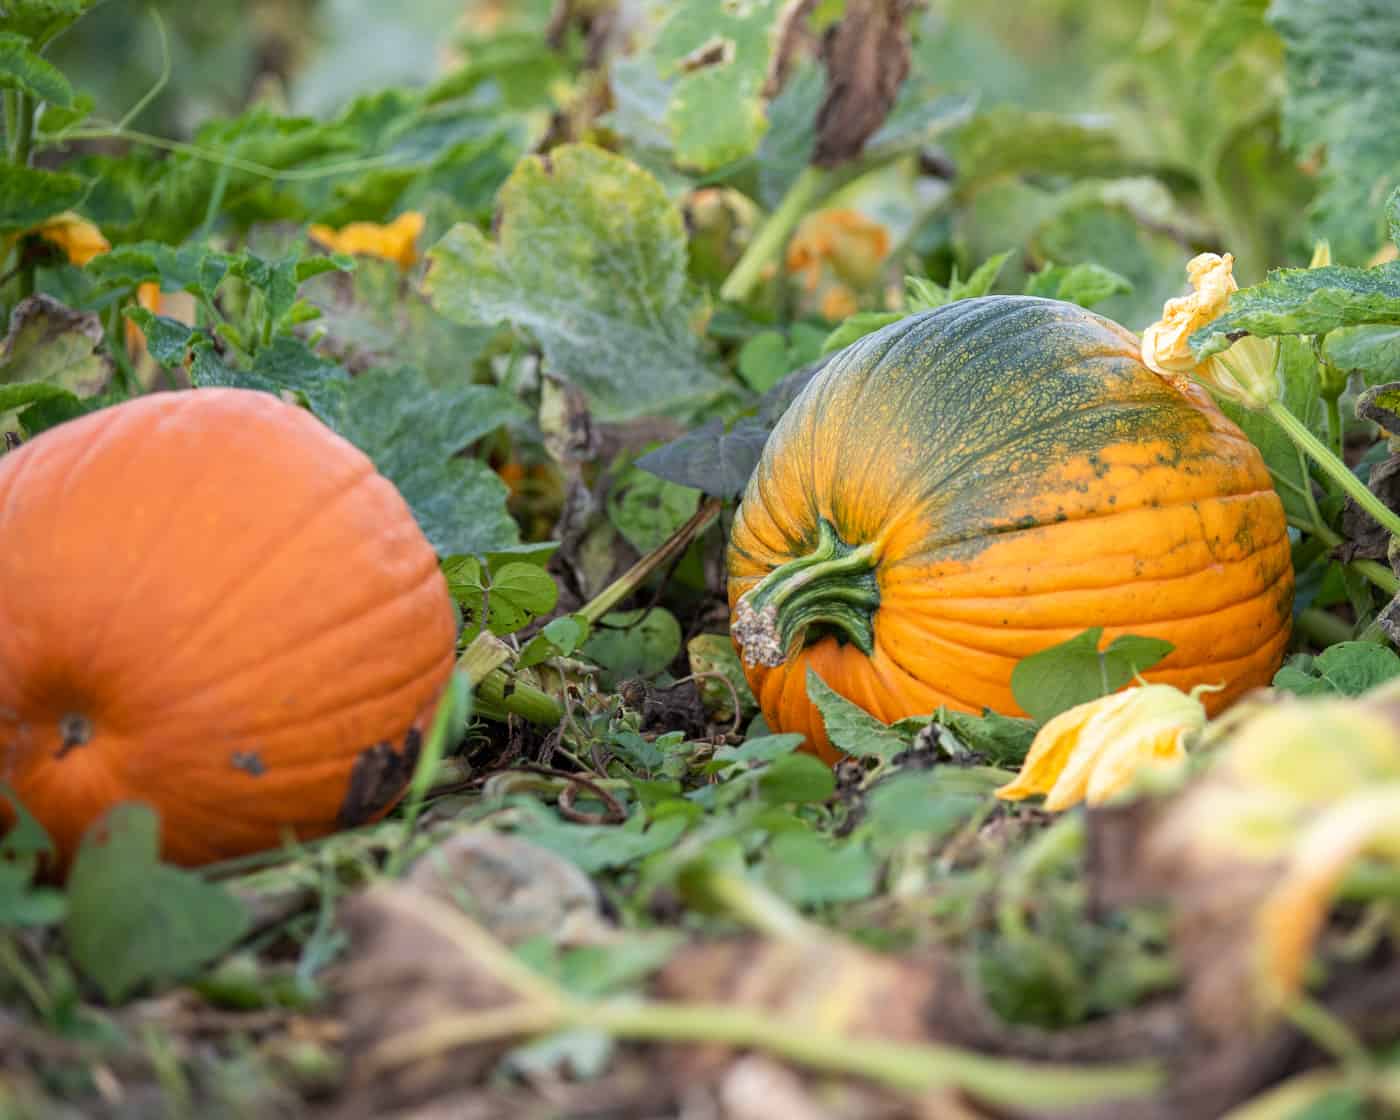 Growing Pumpkins - How to Plant & Grow Pumpkins Successfully - Together